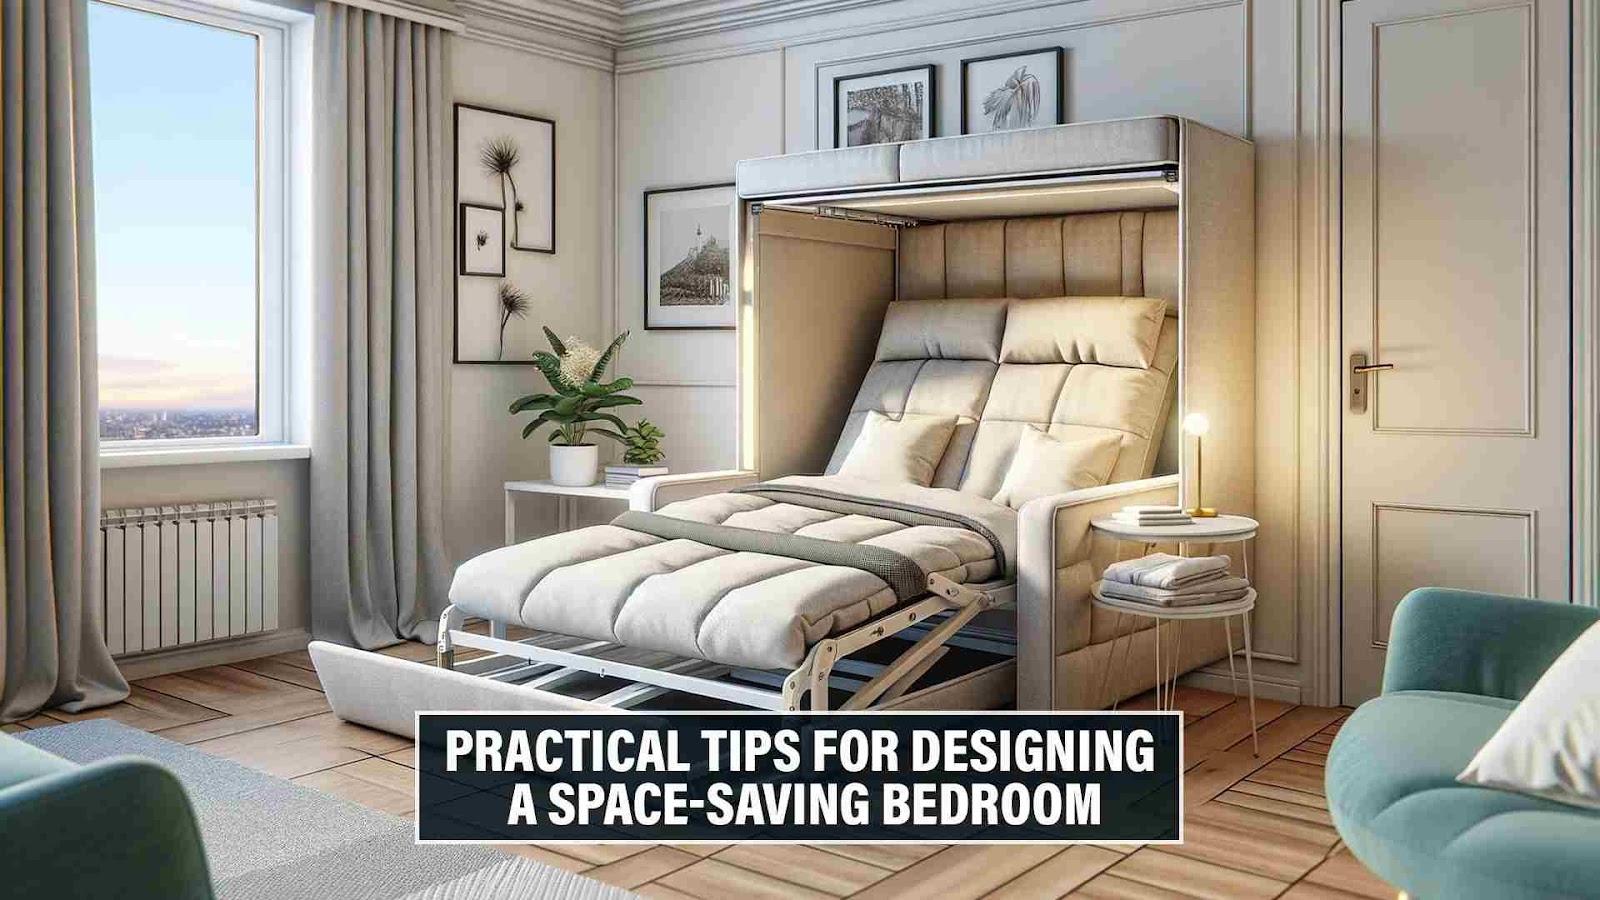 Practical Tips for Designing a Space-Saving Bedroom